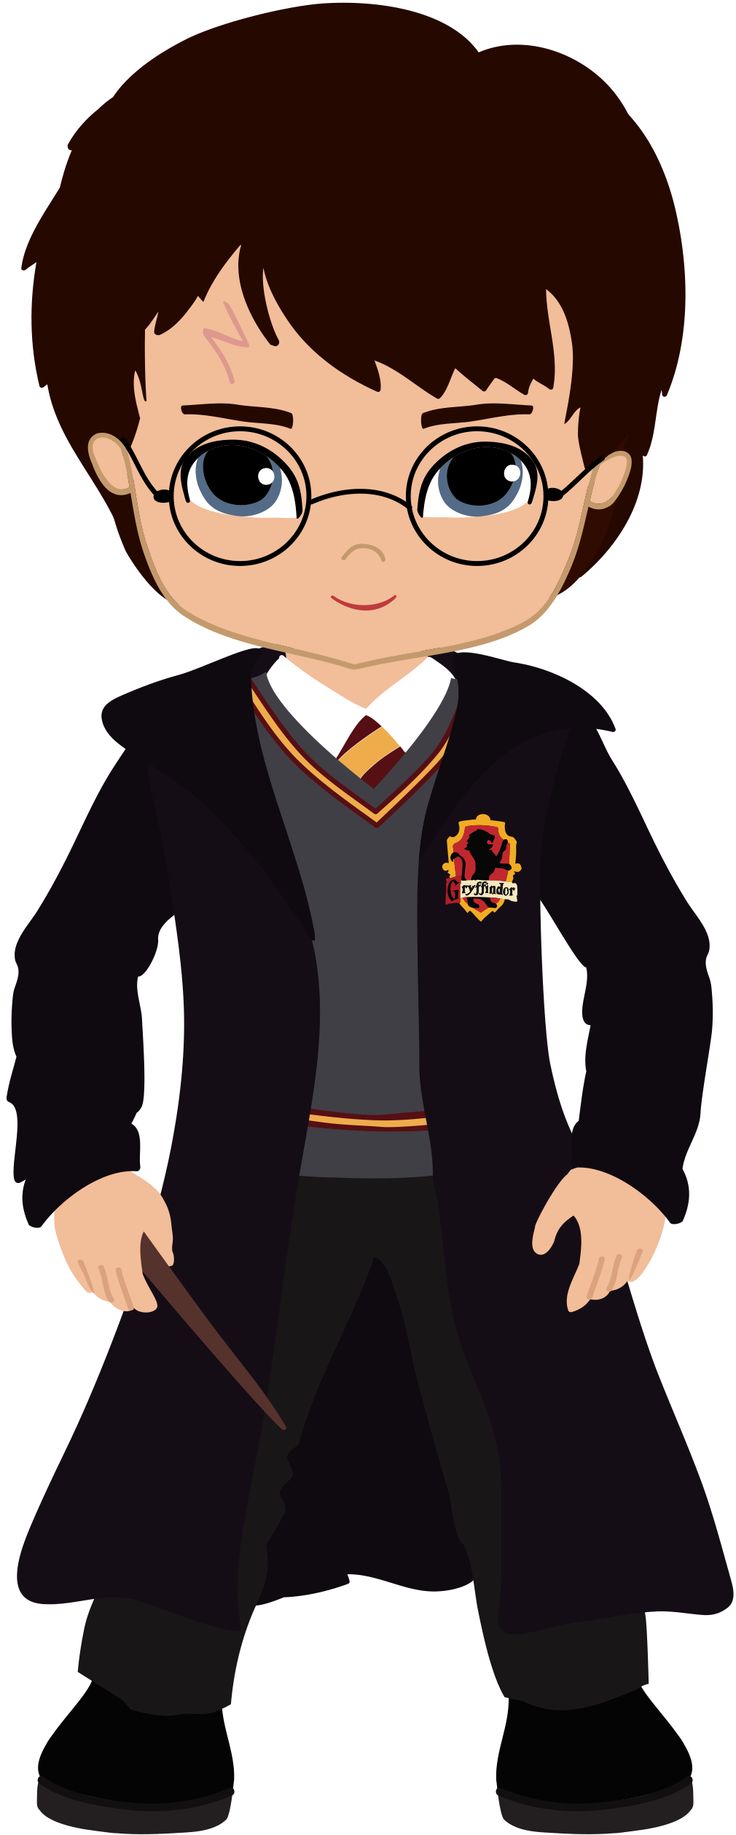 Free harry potter clip art pictures 2